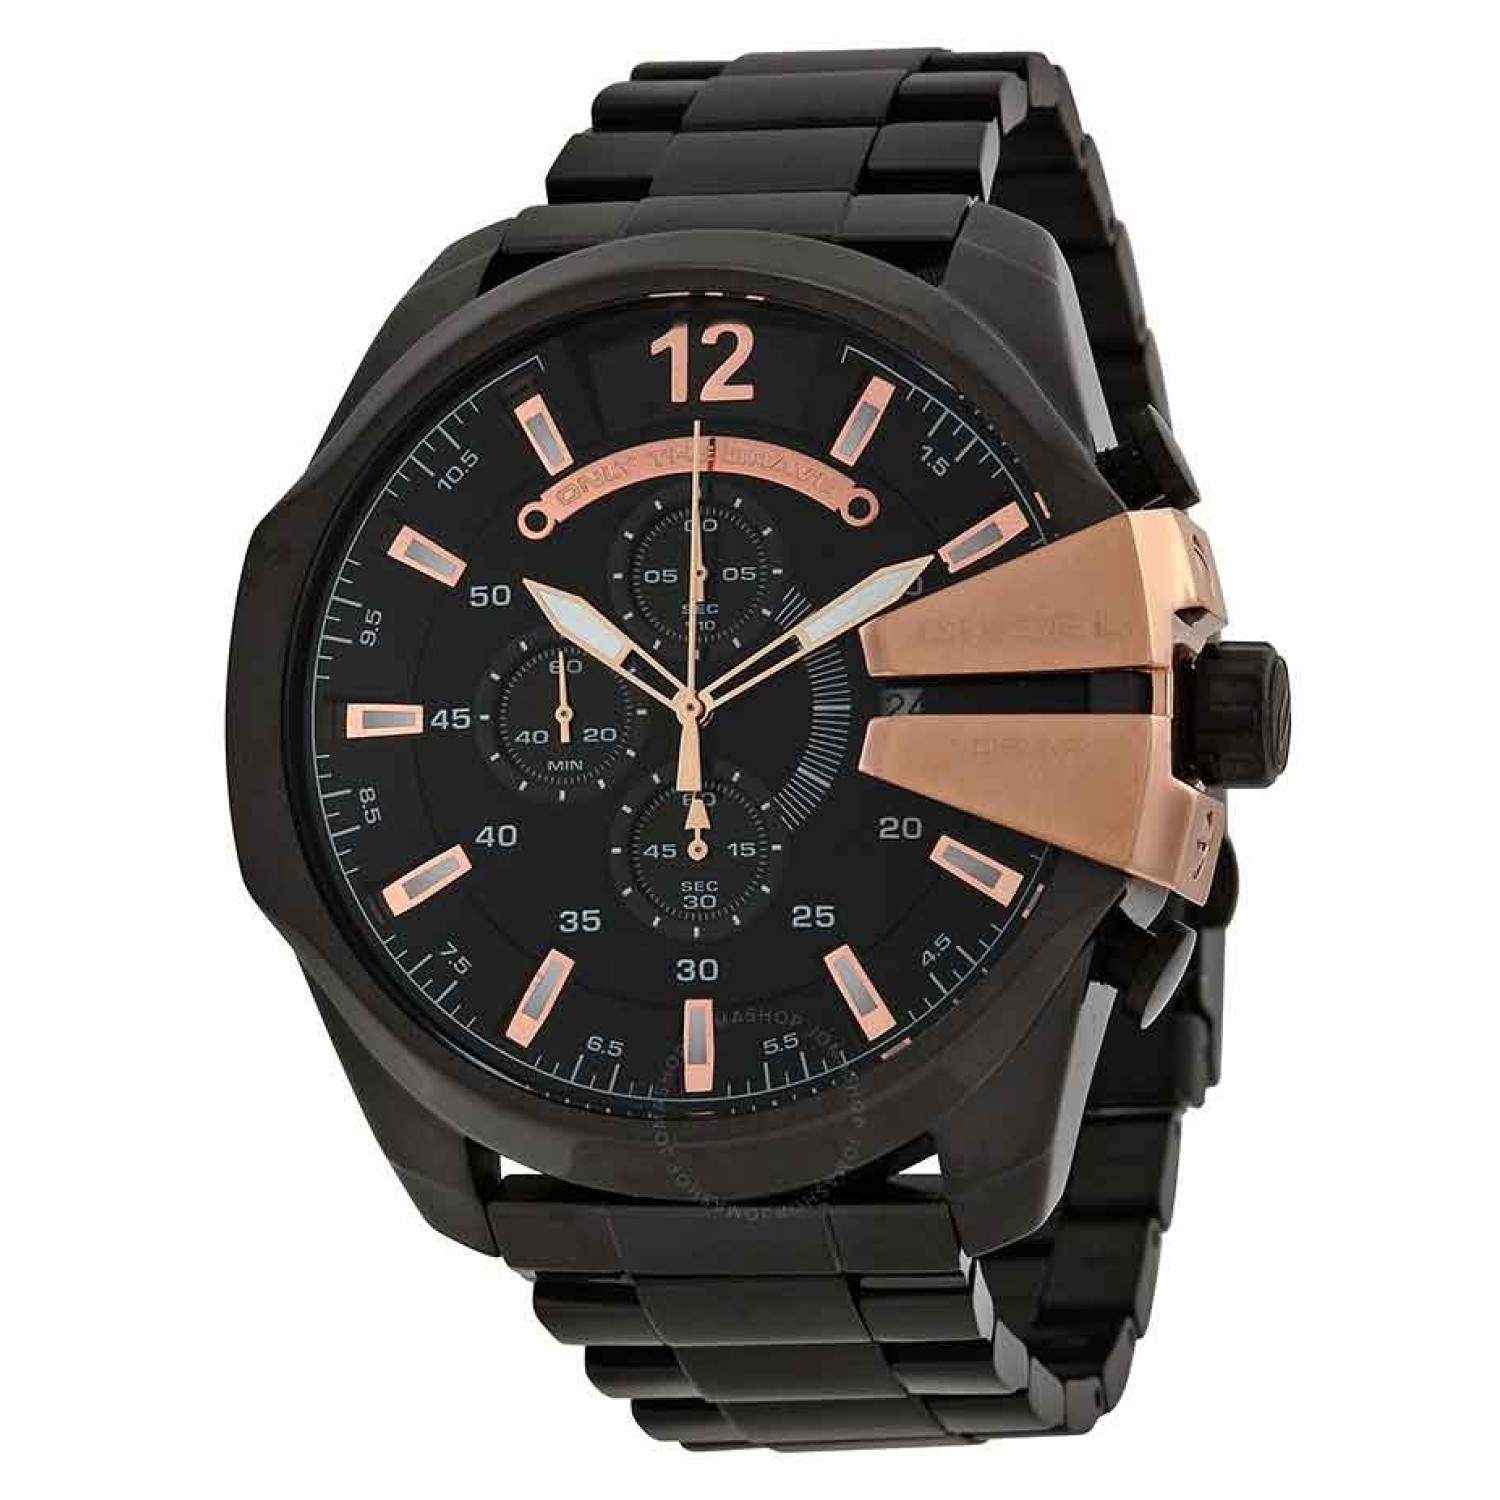 DZ4309 Diesel Master Chief Chronograph Watch. This oversized mens Diesel Mega Chief watch is made from black ion-plated steel and is powered by a chronograph quartz movement. It is fastened with a black metal bracelet and has a black dial. The watch has a